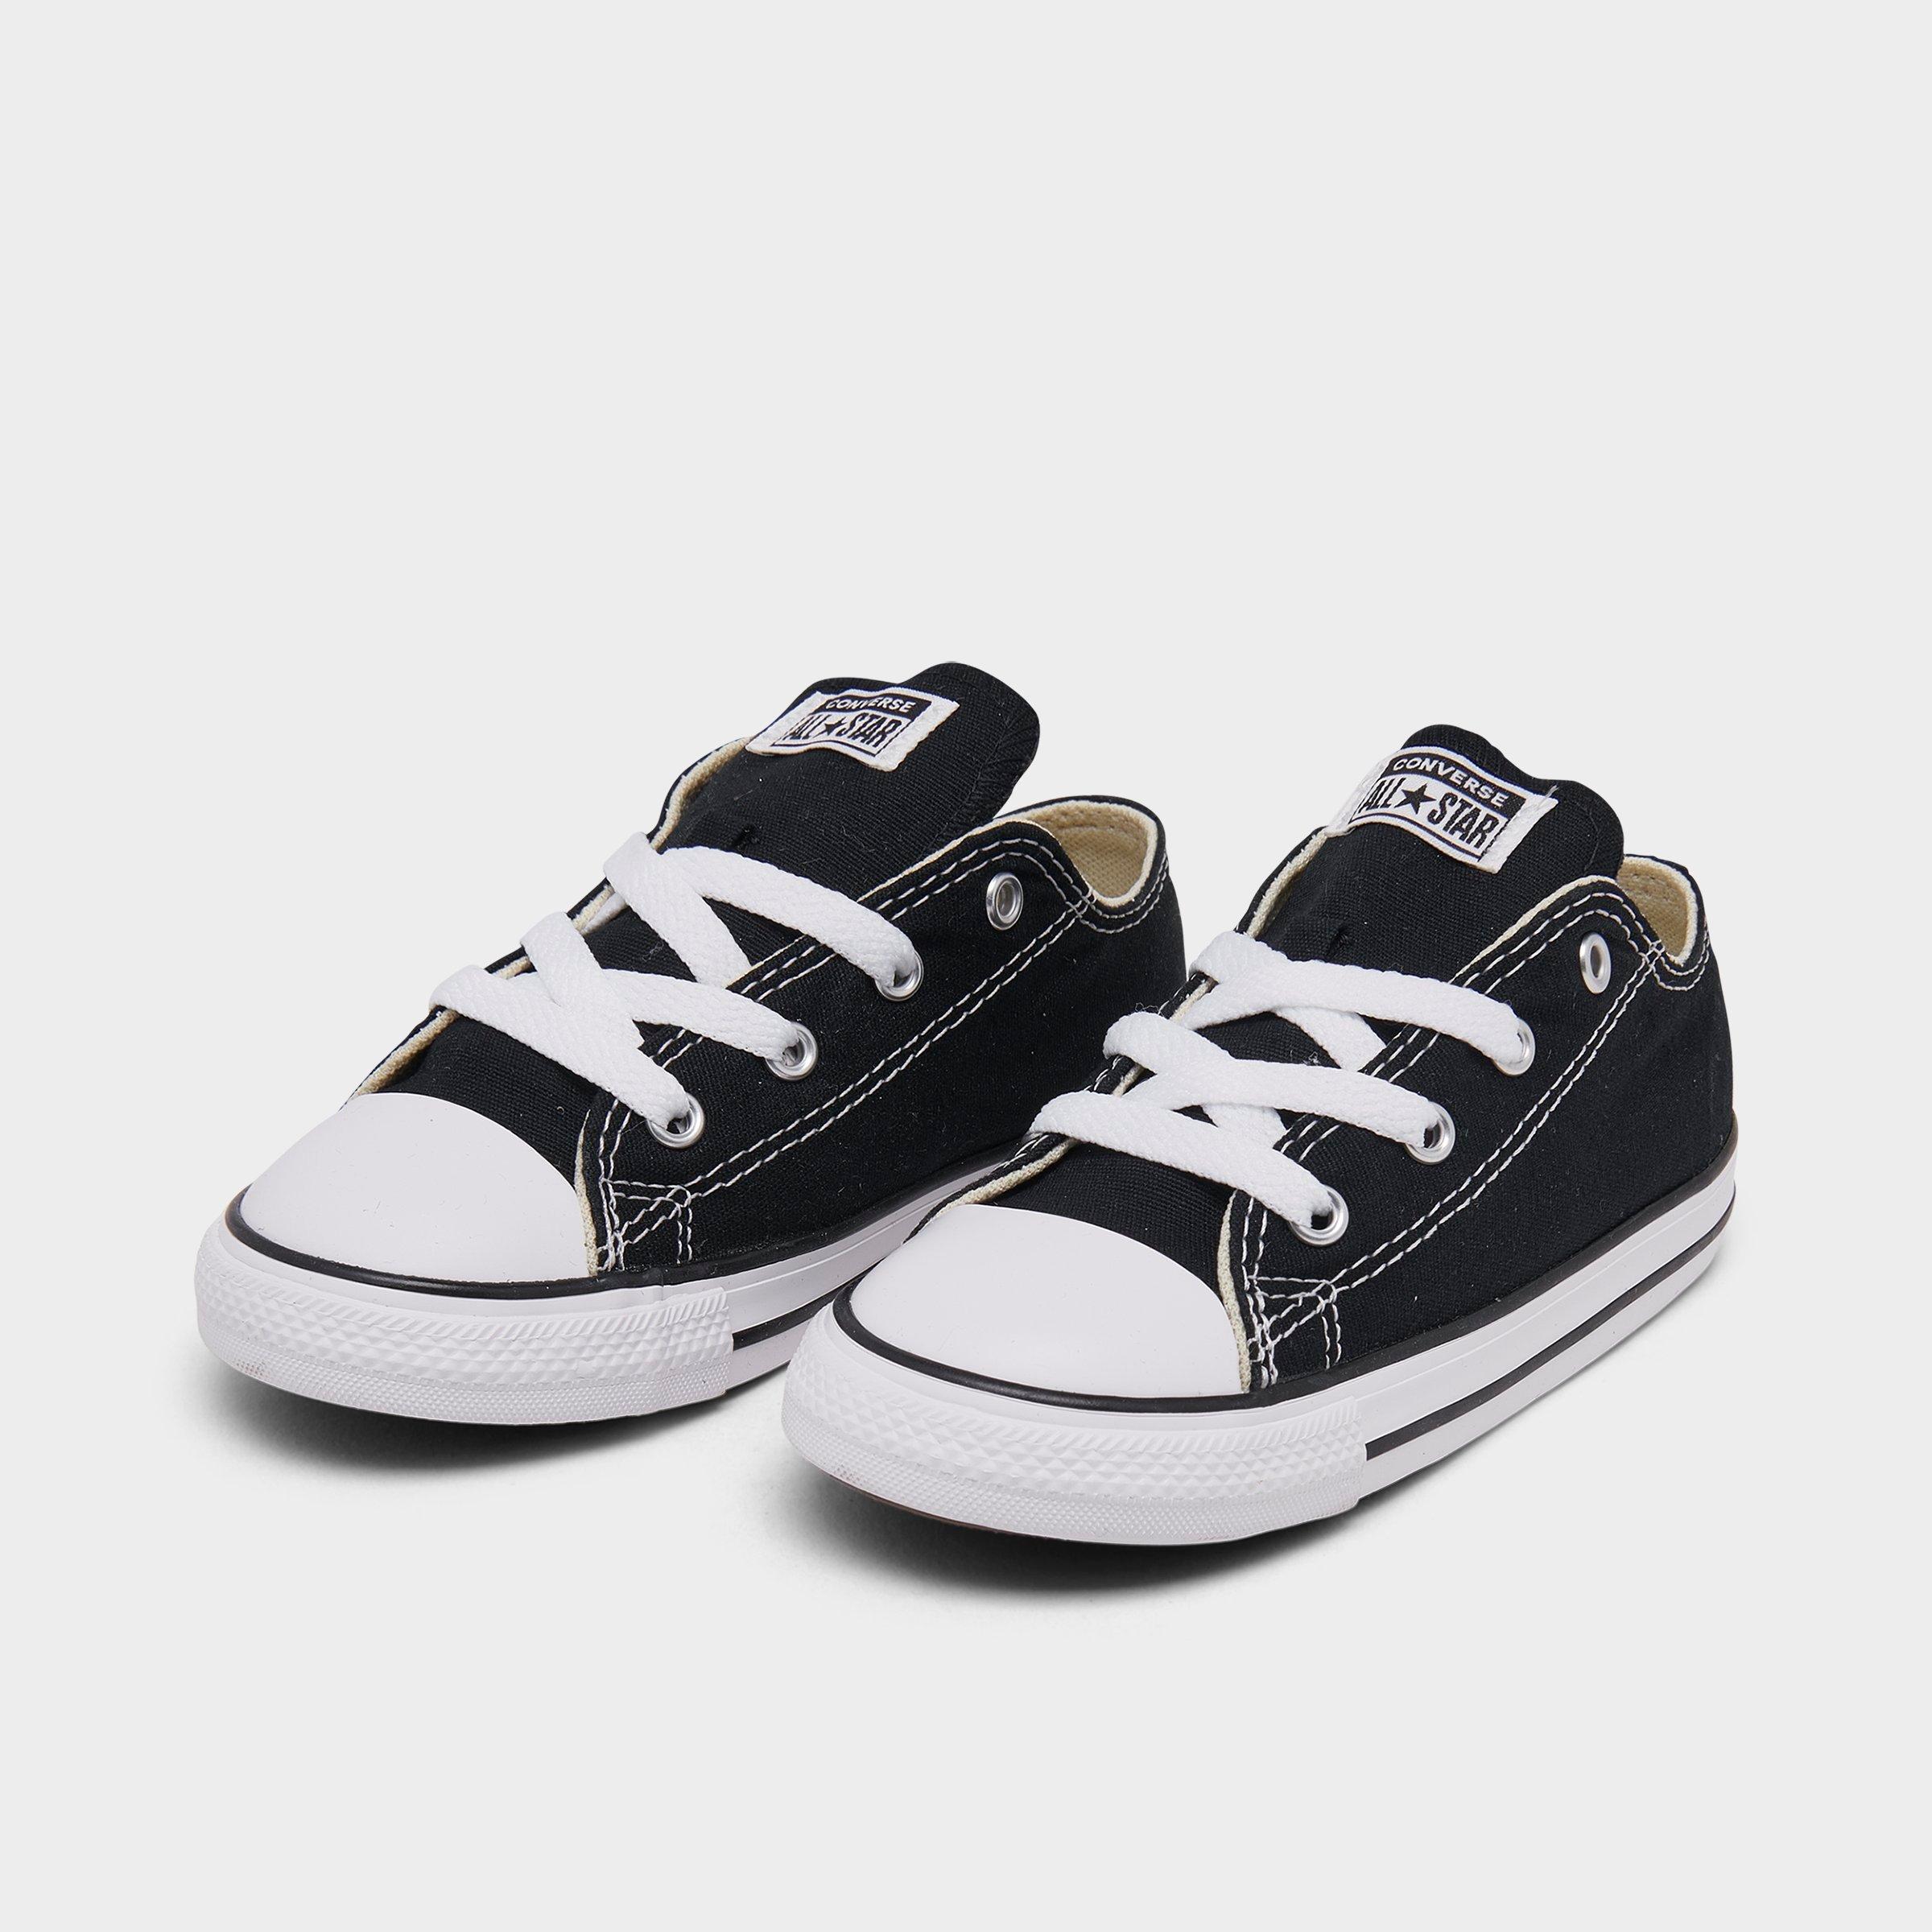 where to buy toddler converse